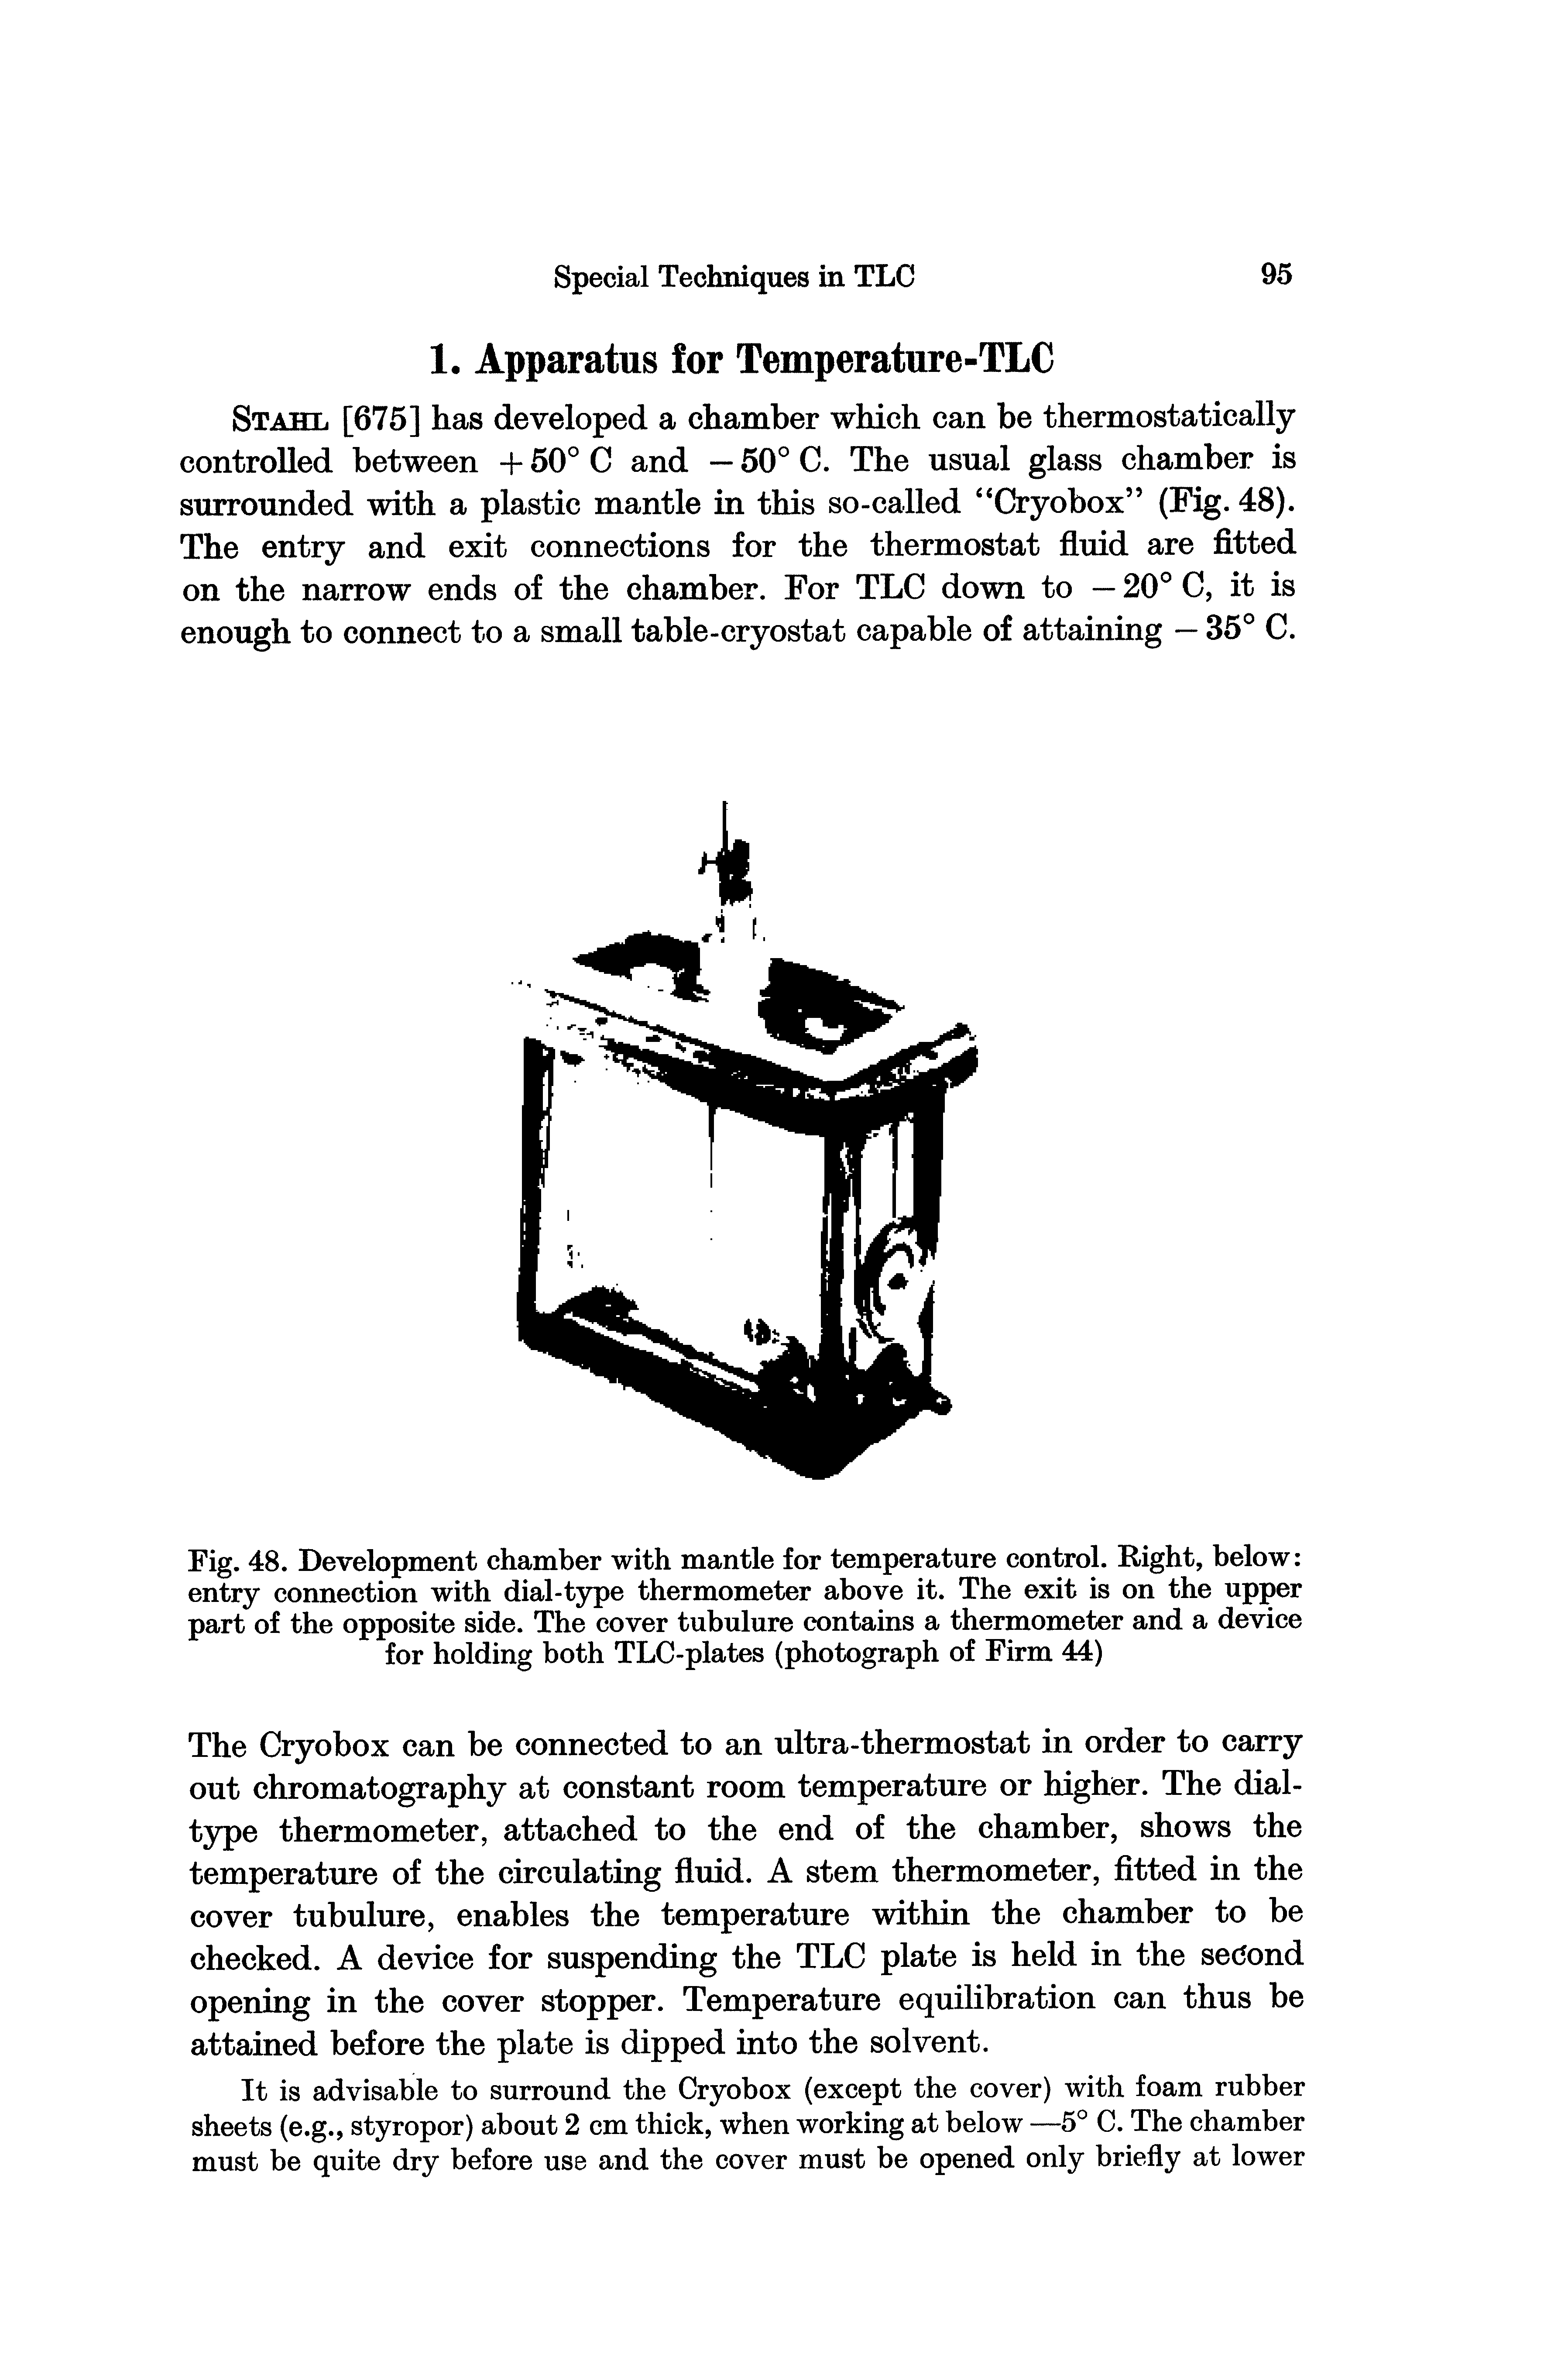 Fig. 48. Development chamber with mantle for temperature control. Right, below entry connection with dial-type thermometer above it. The exit is on the upper part of the opposite side. The cover tubulure contains a thermometer and a device for holding both TLC-plates (photograph of Firm 44)...